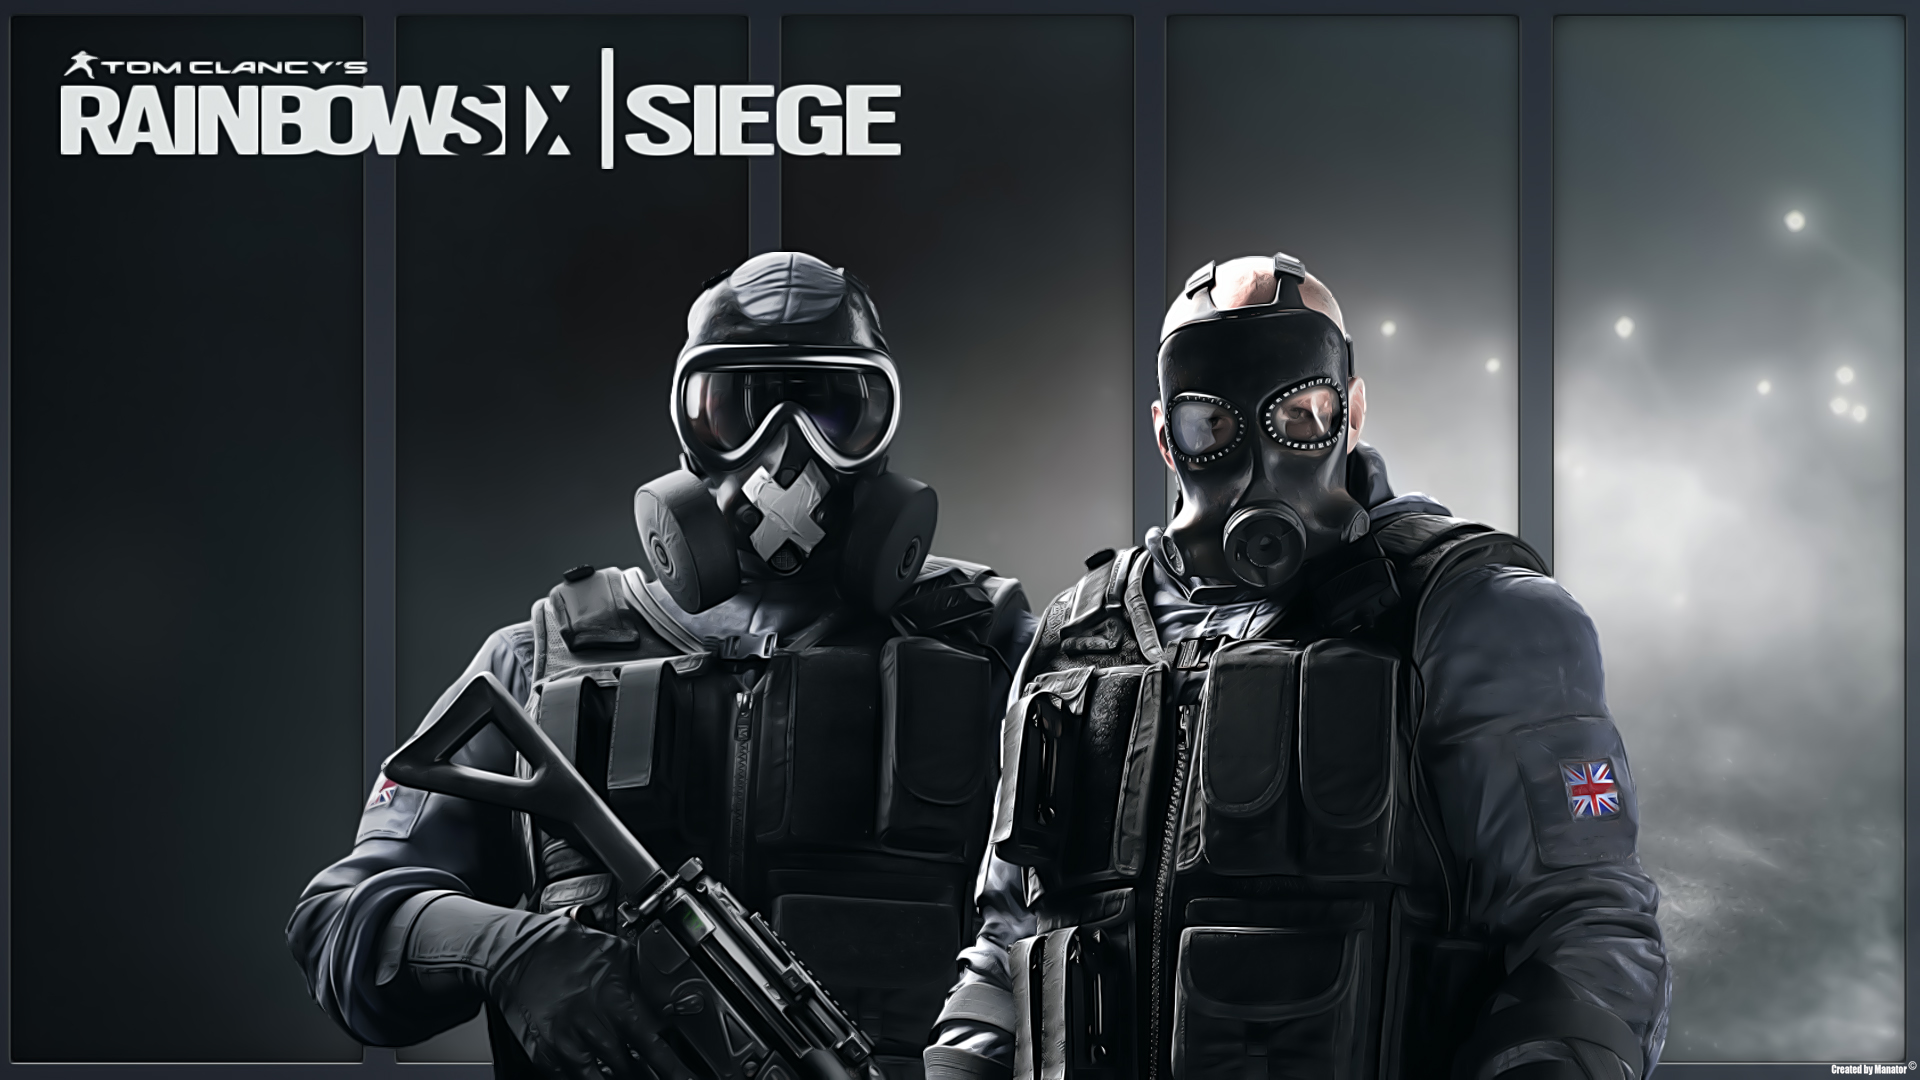 Tom Cy S Rainbow Six Siege Wallpaper HD Full Pictures